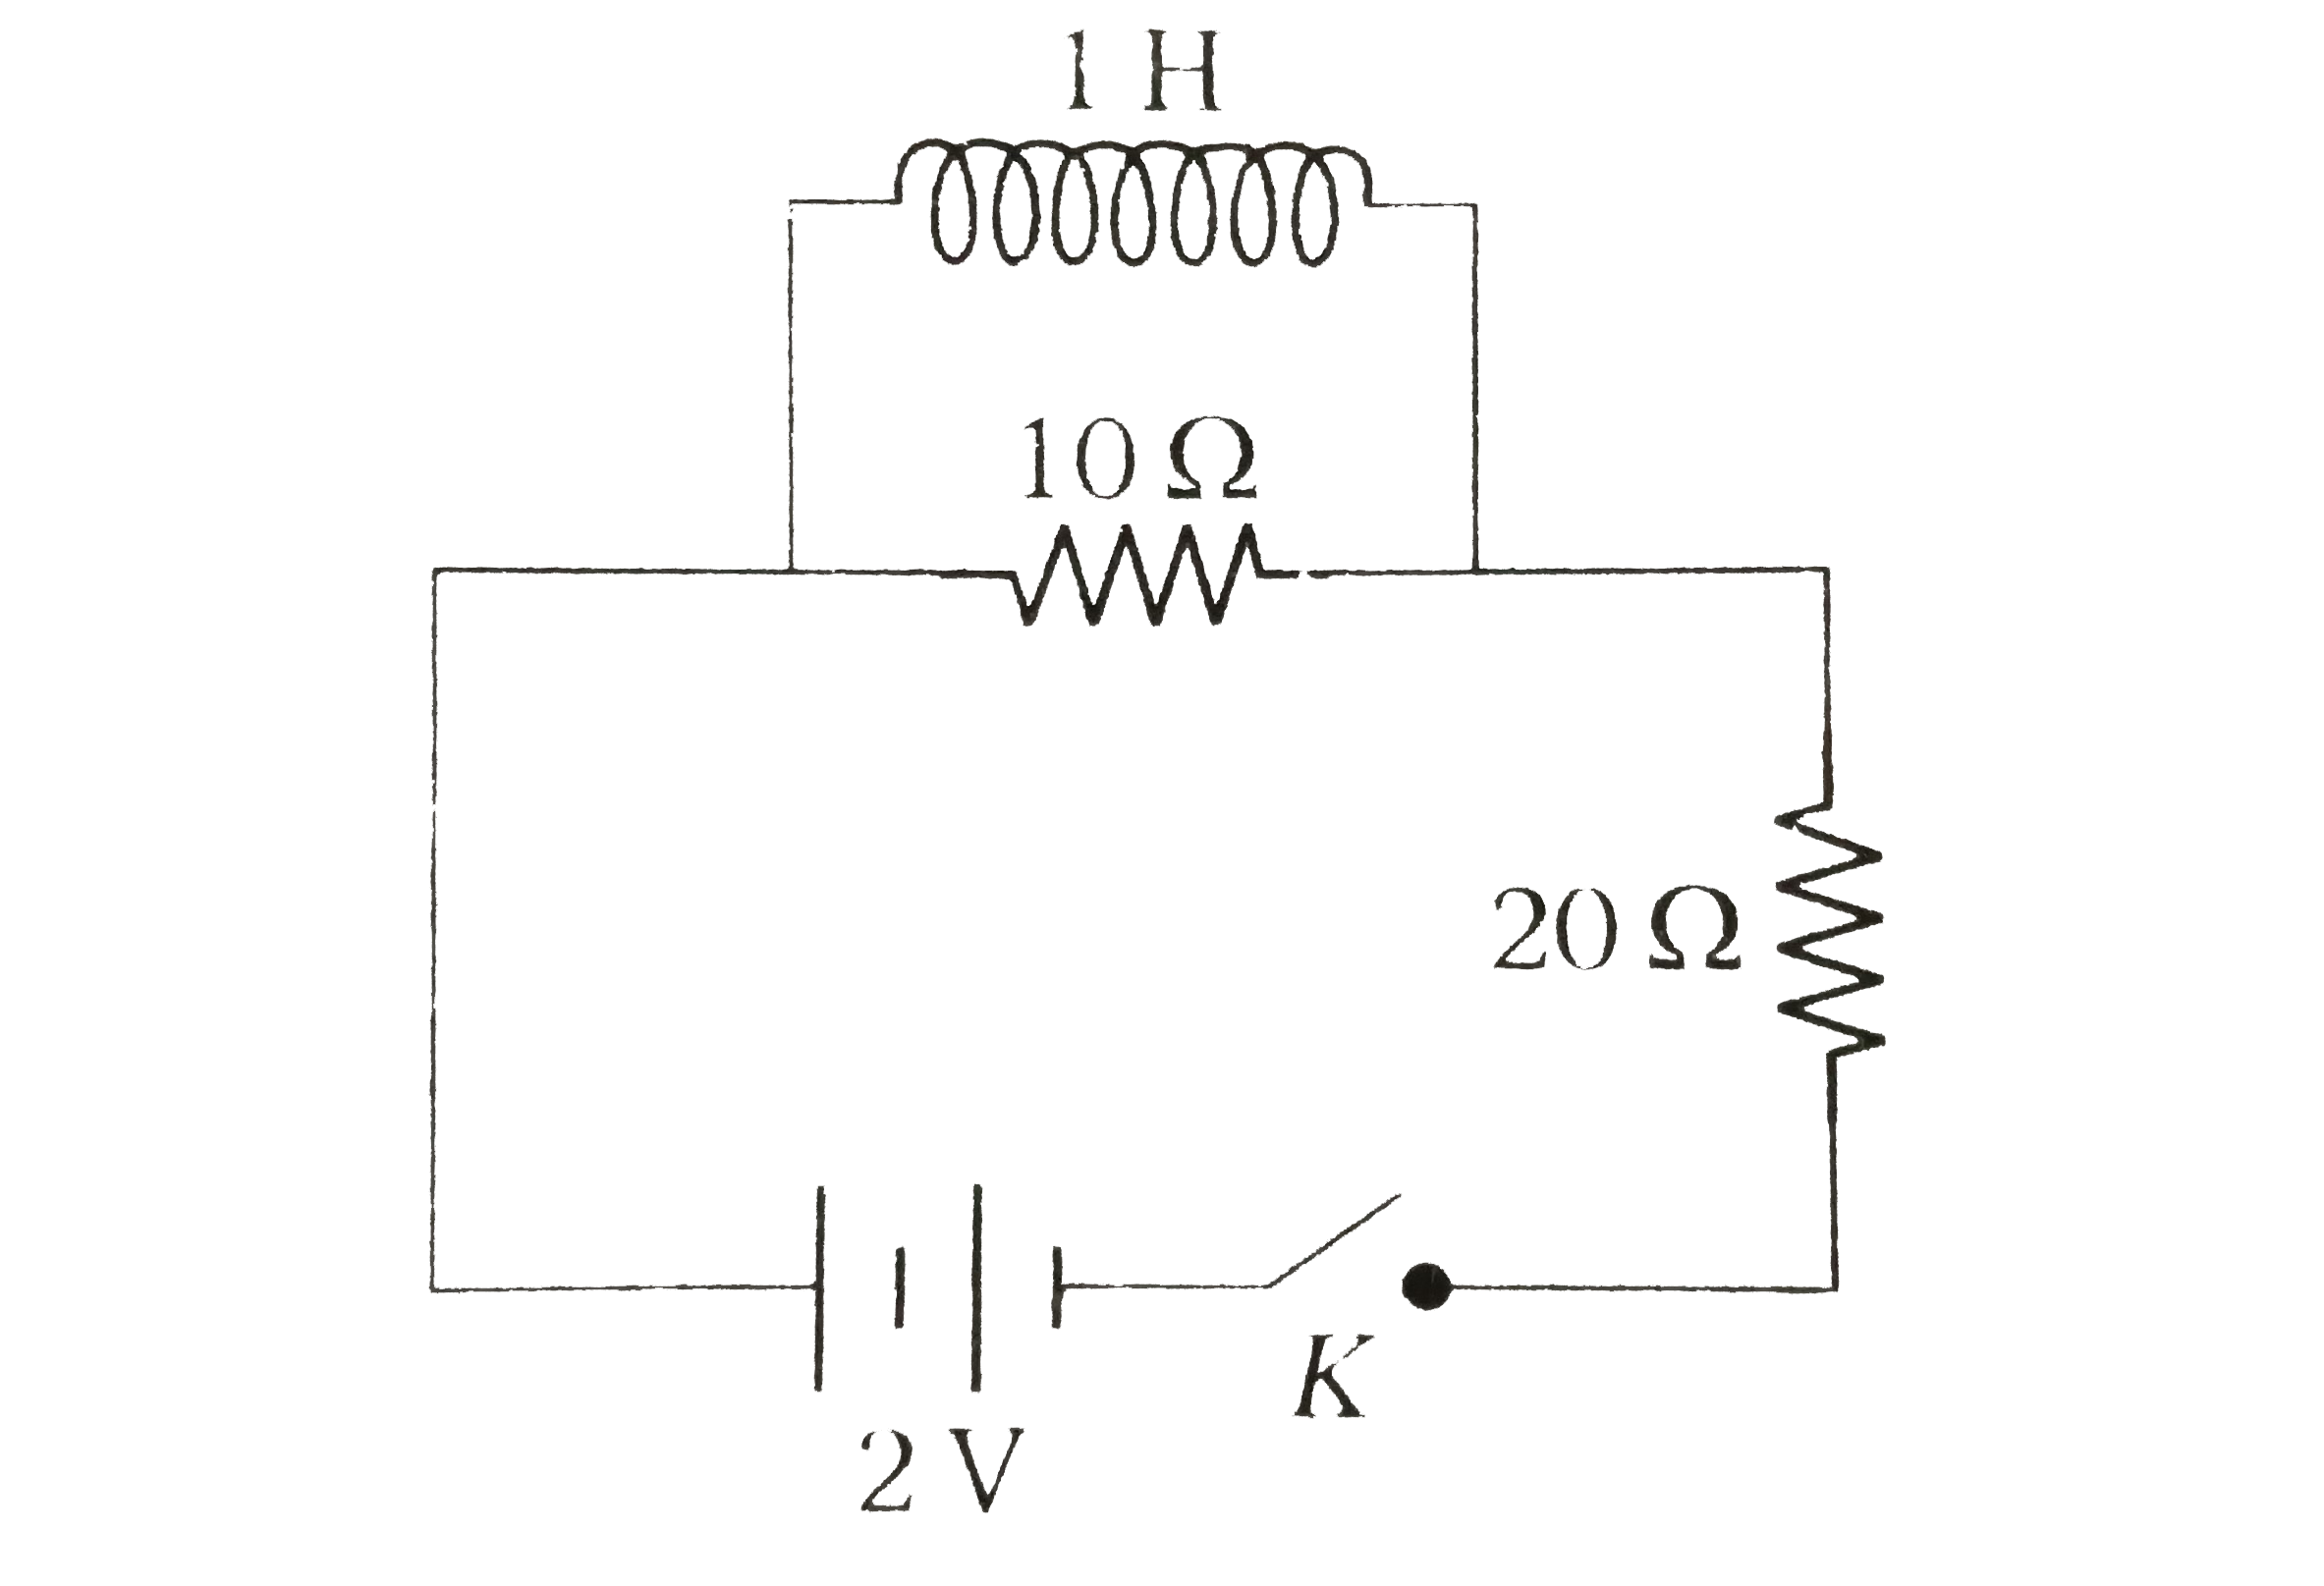 In the following figure, what is the final value of current in the 10 Omega resistance when the plug  of key K is inserted?